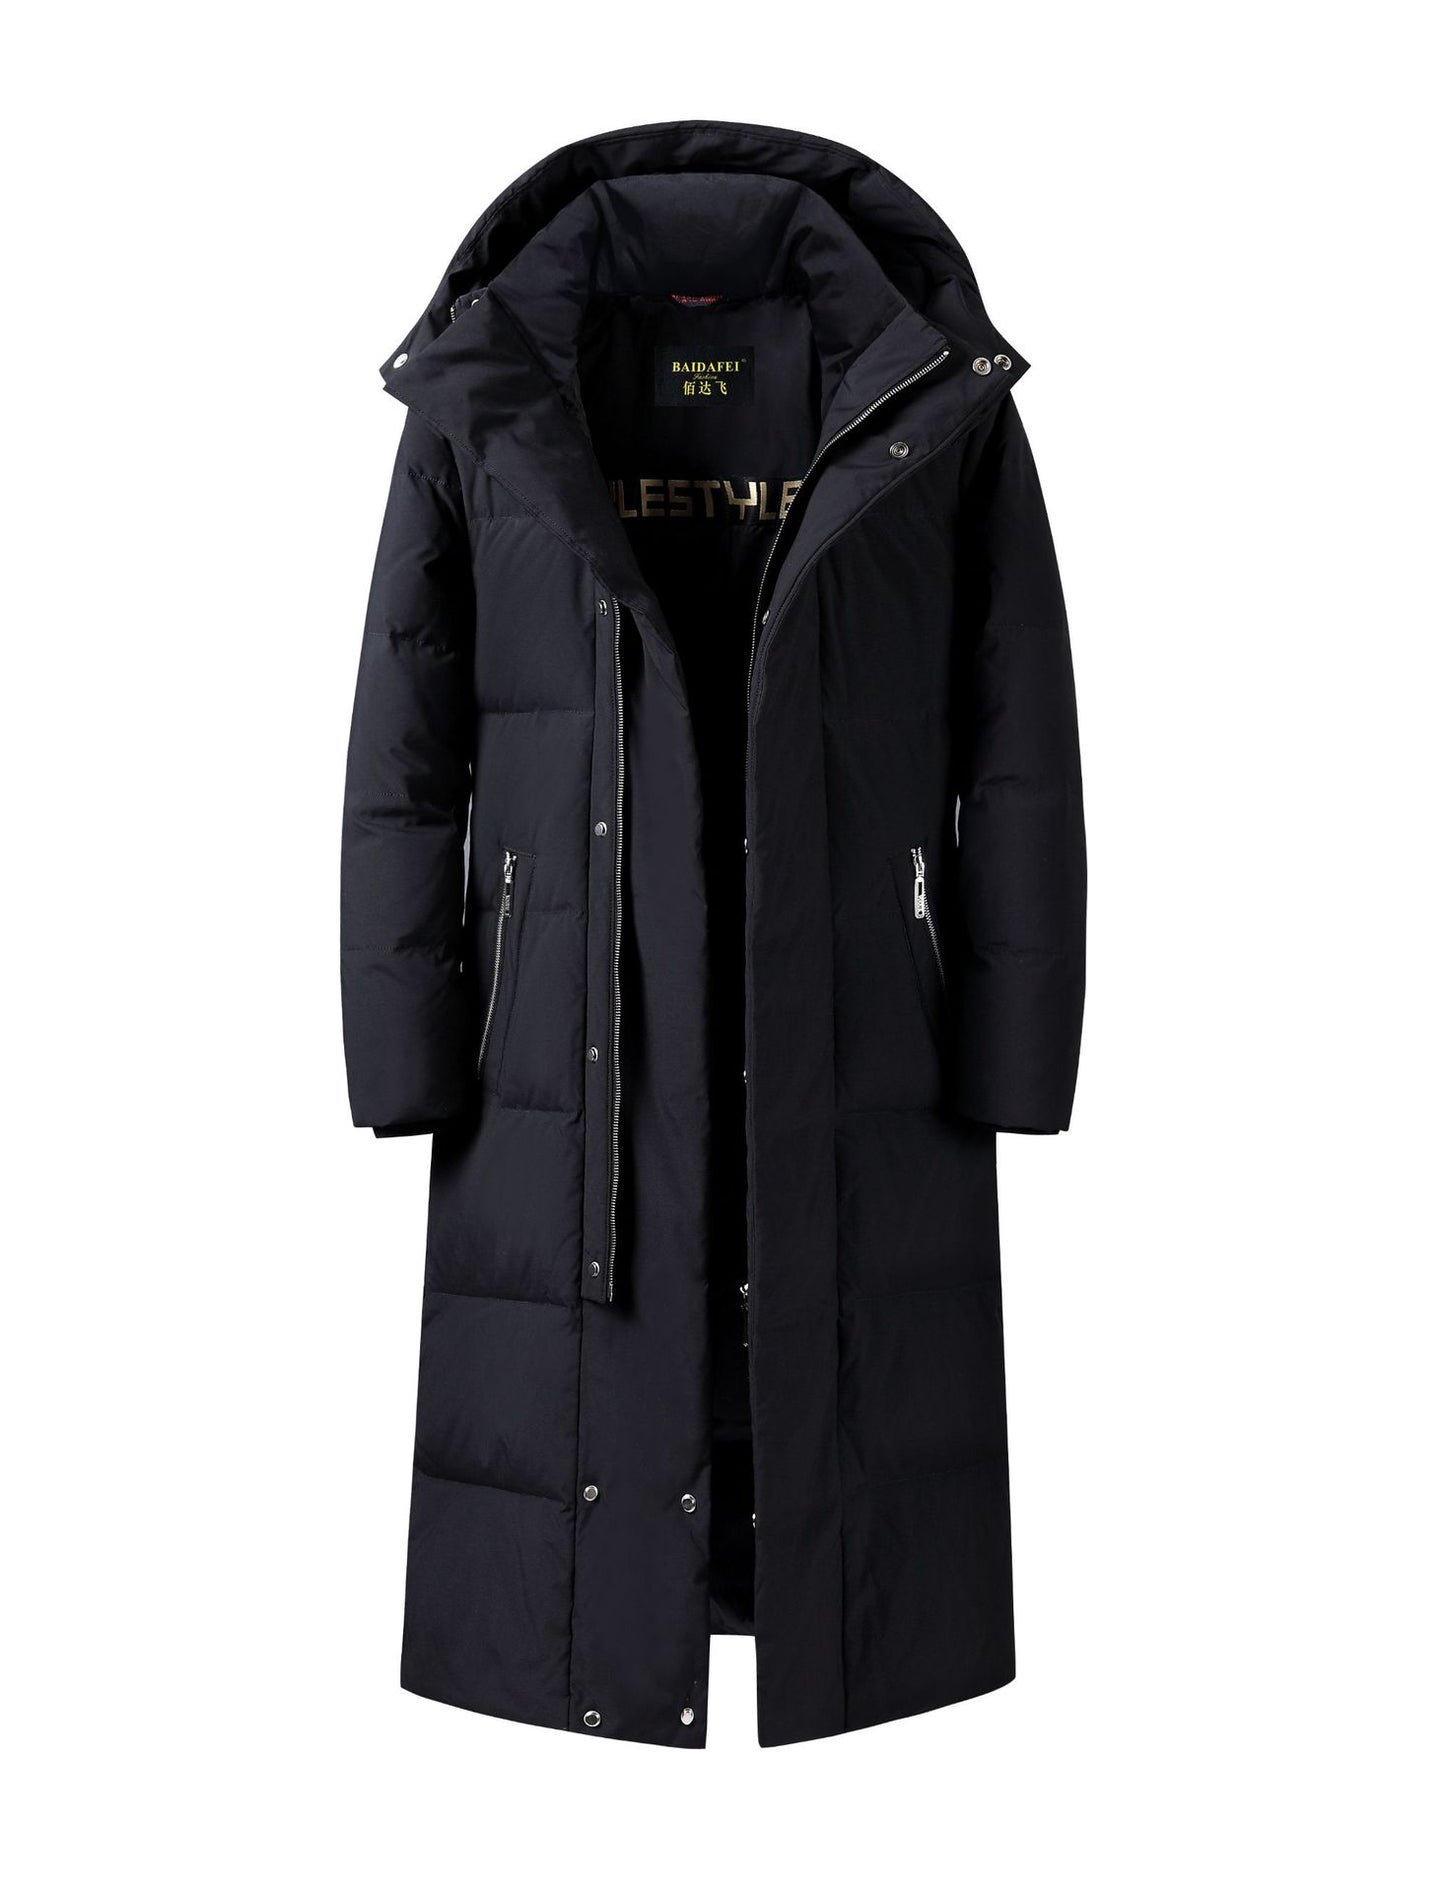 Down Jacket Men's Mid-length Couple Style